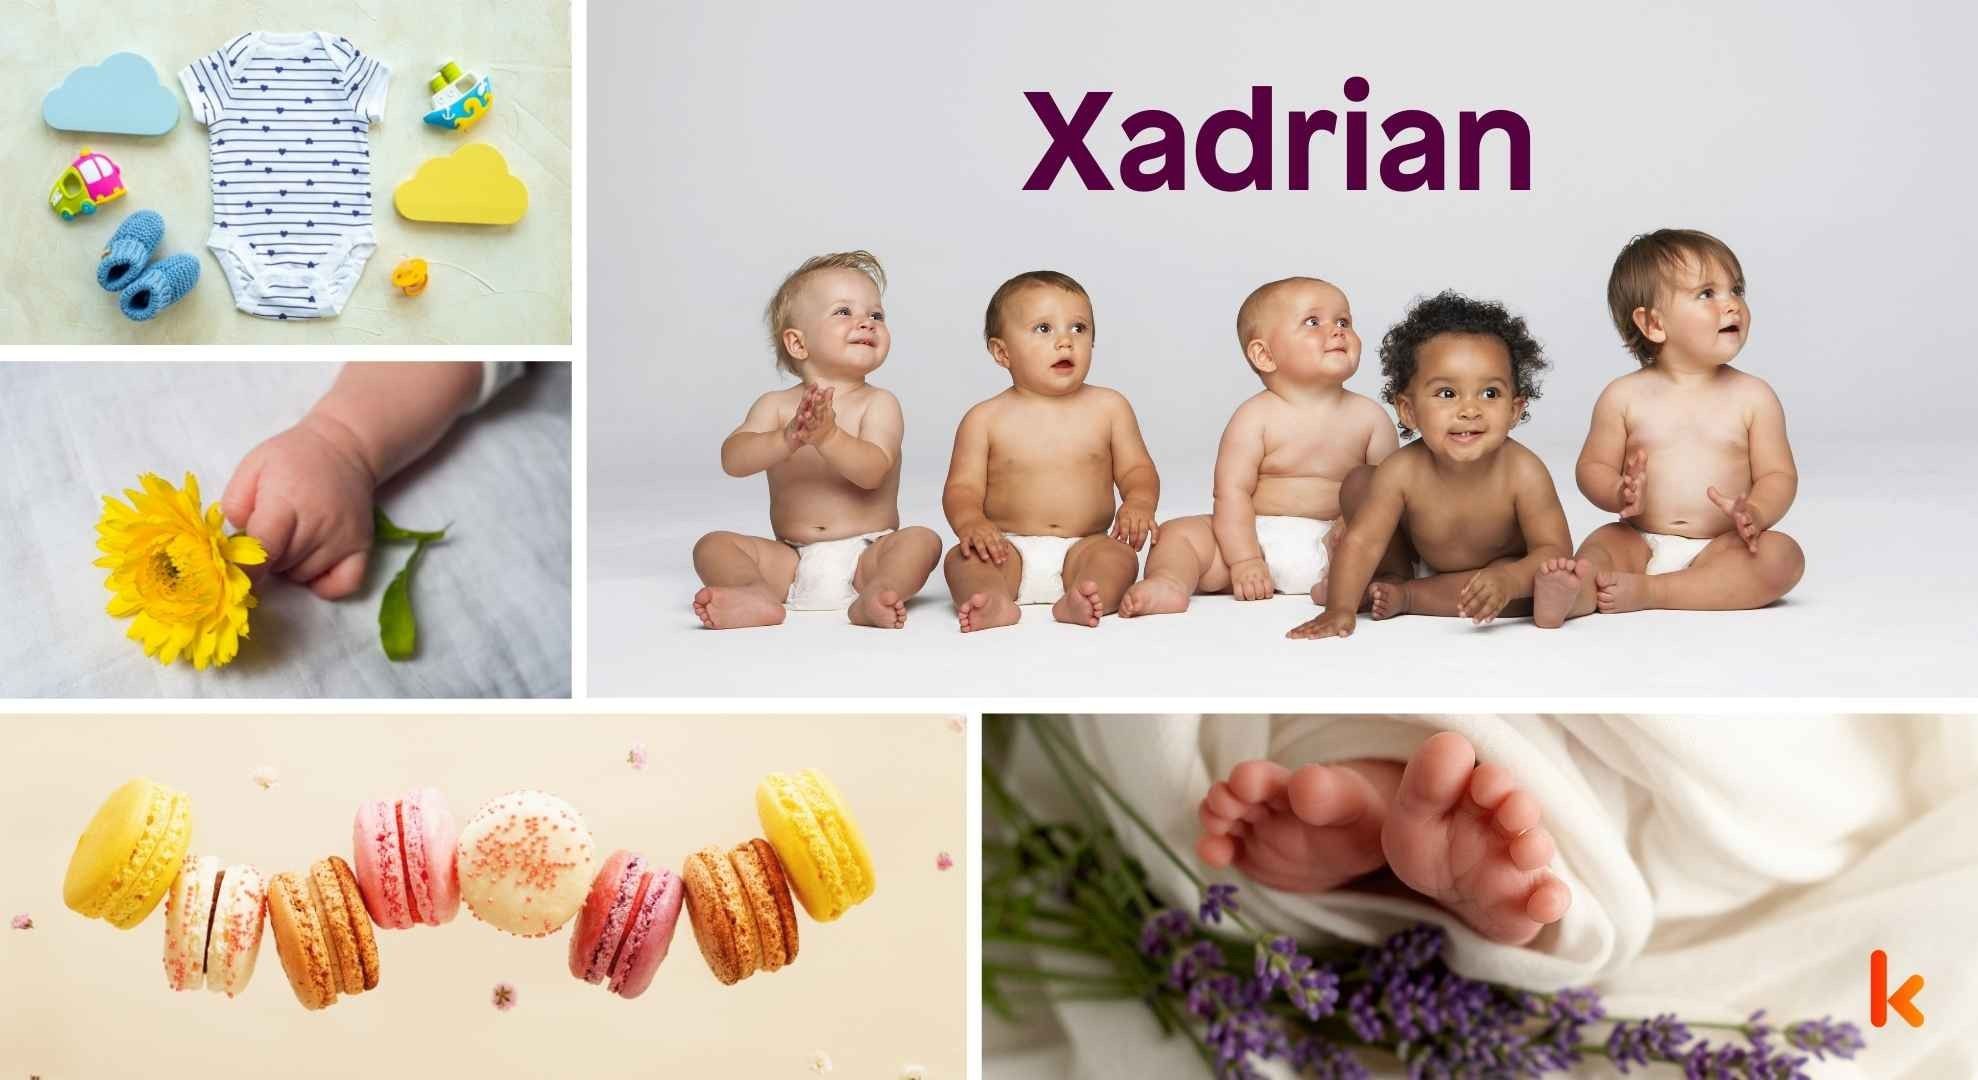 Meaning of the name Xadrian